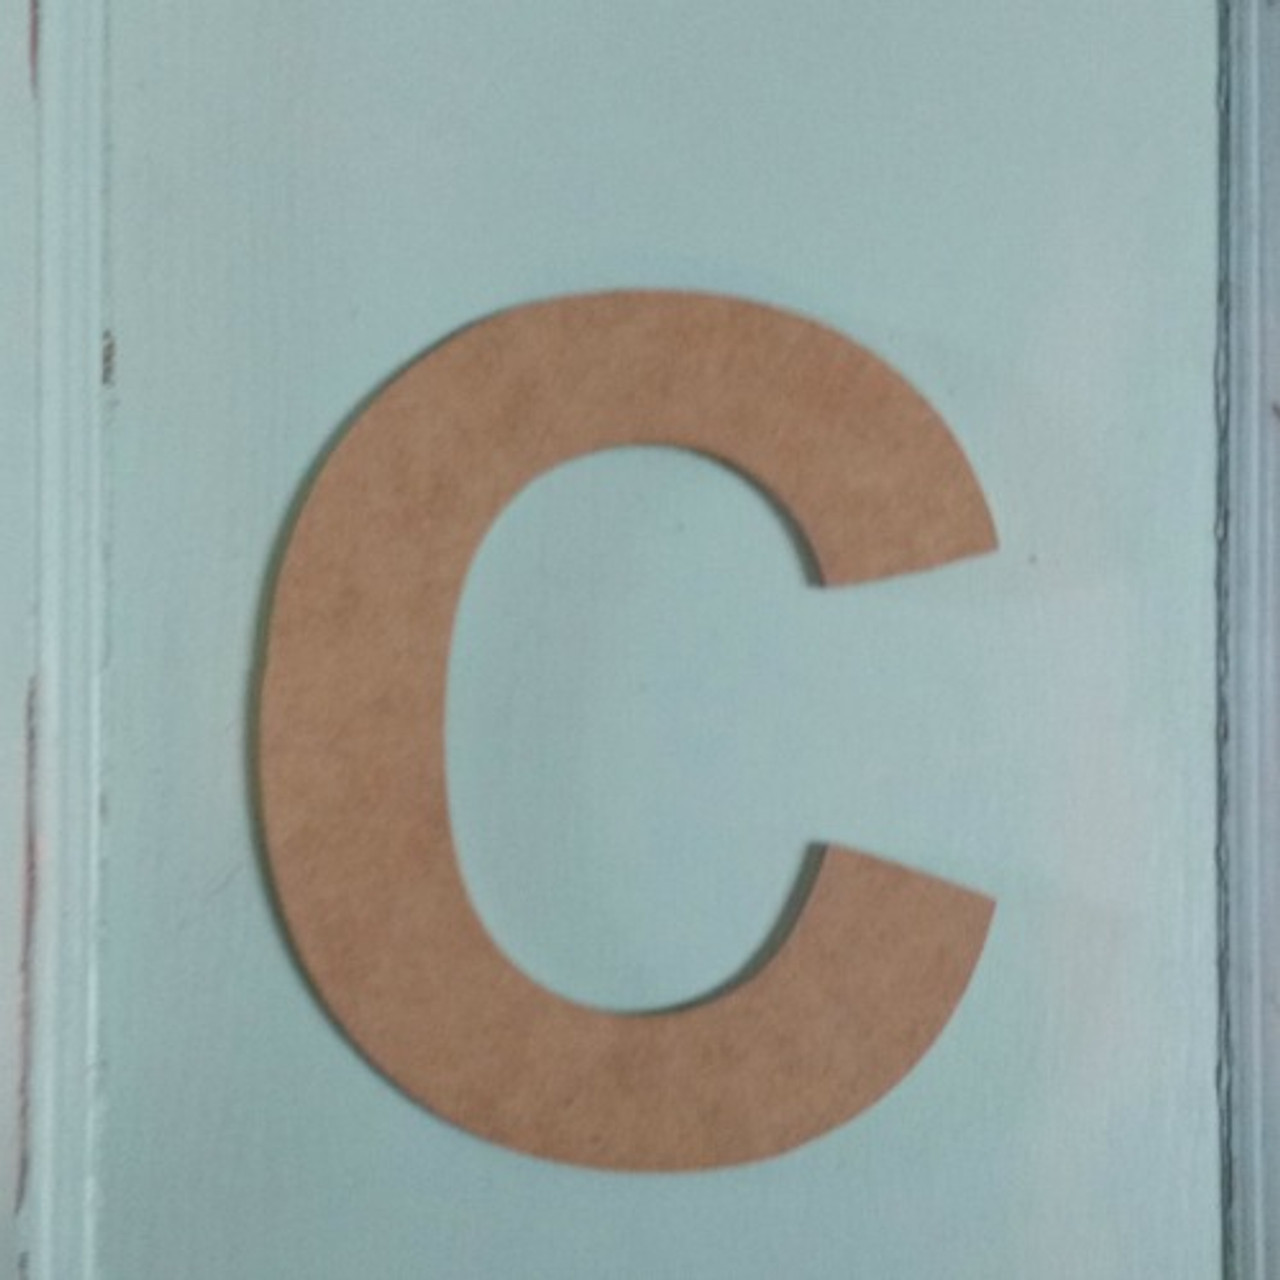 Arial Font Wood Letter Cutouts